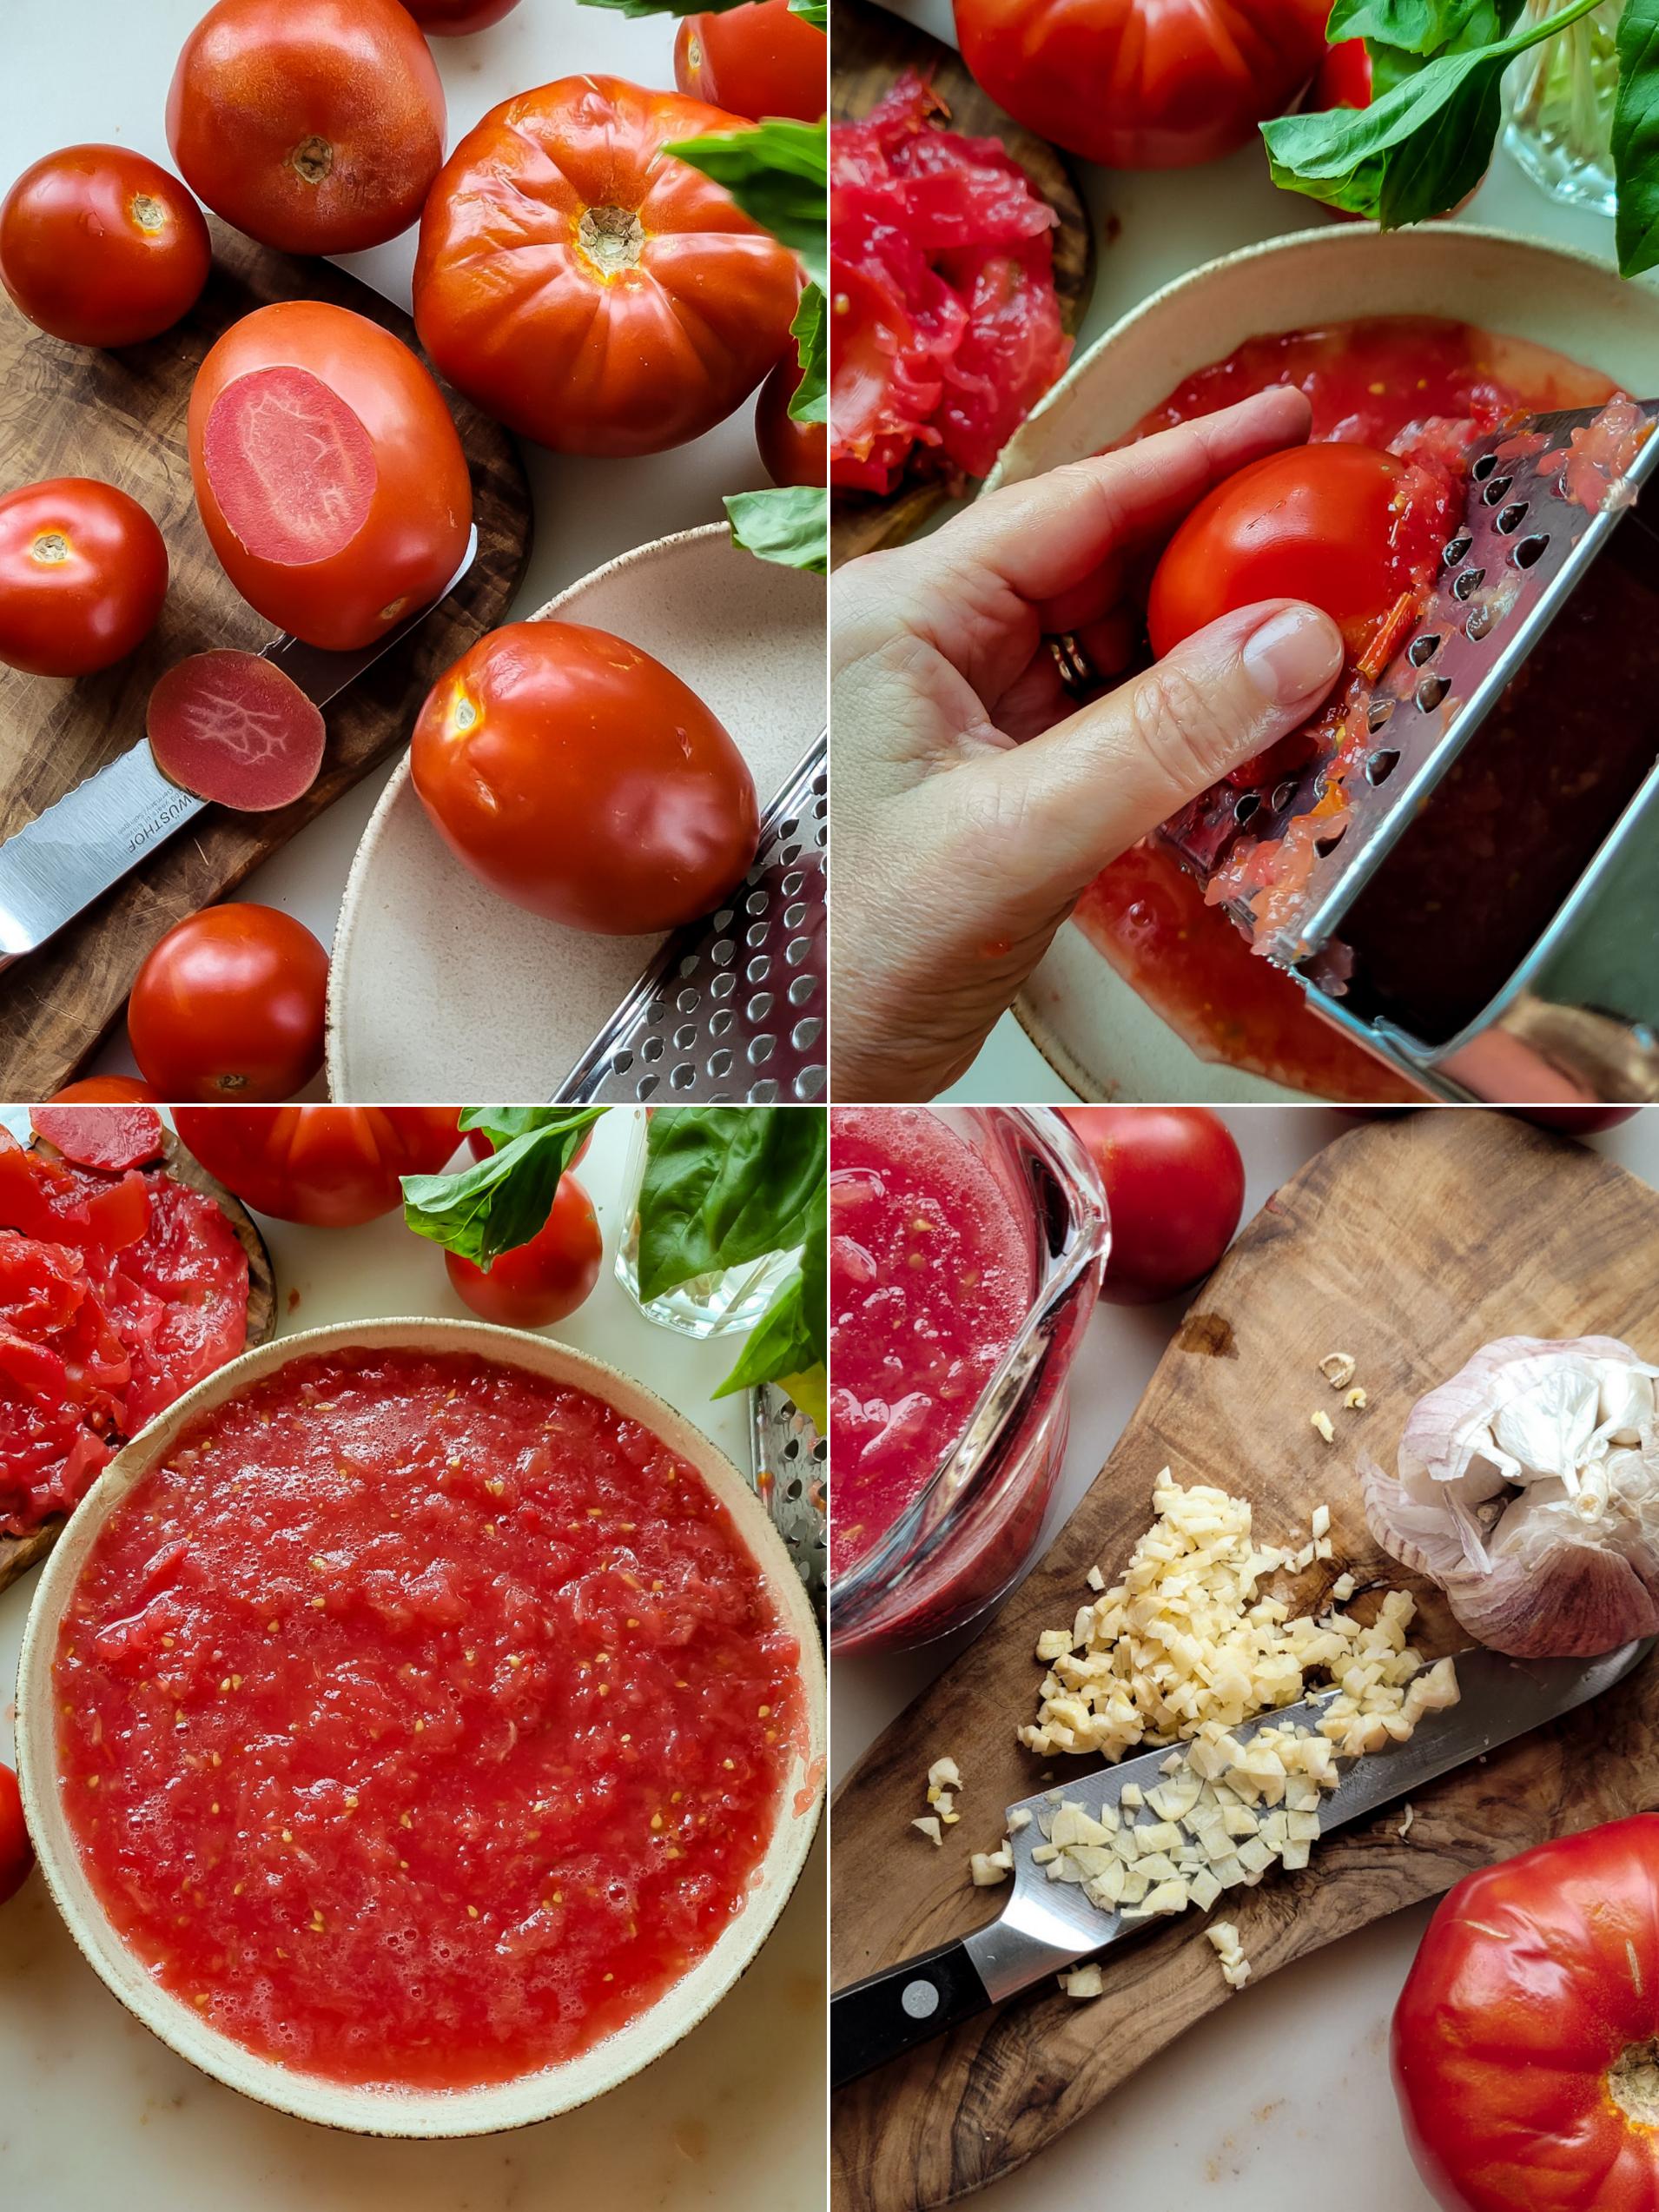 Collage showing the preparing of a fresh tomato Summer Sauce, including grating the tomatoes.